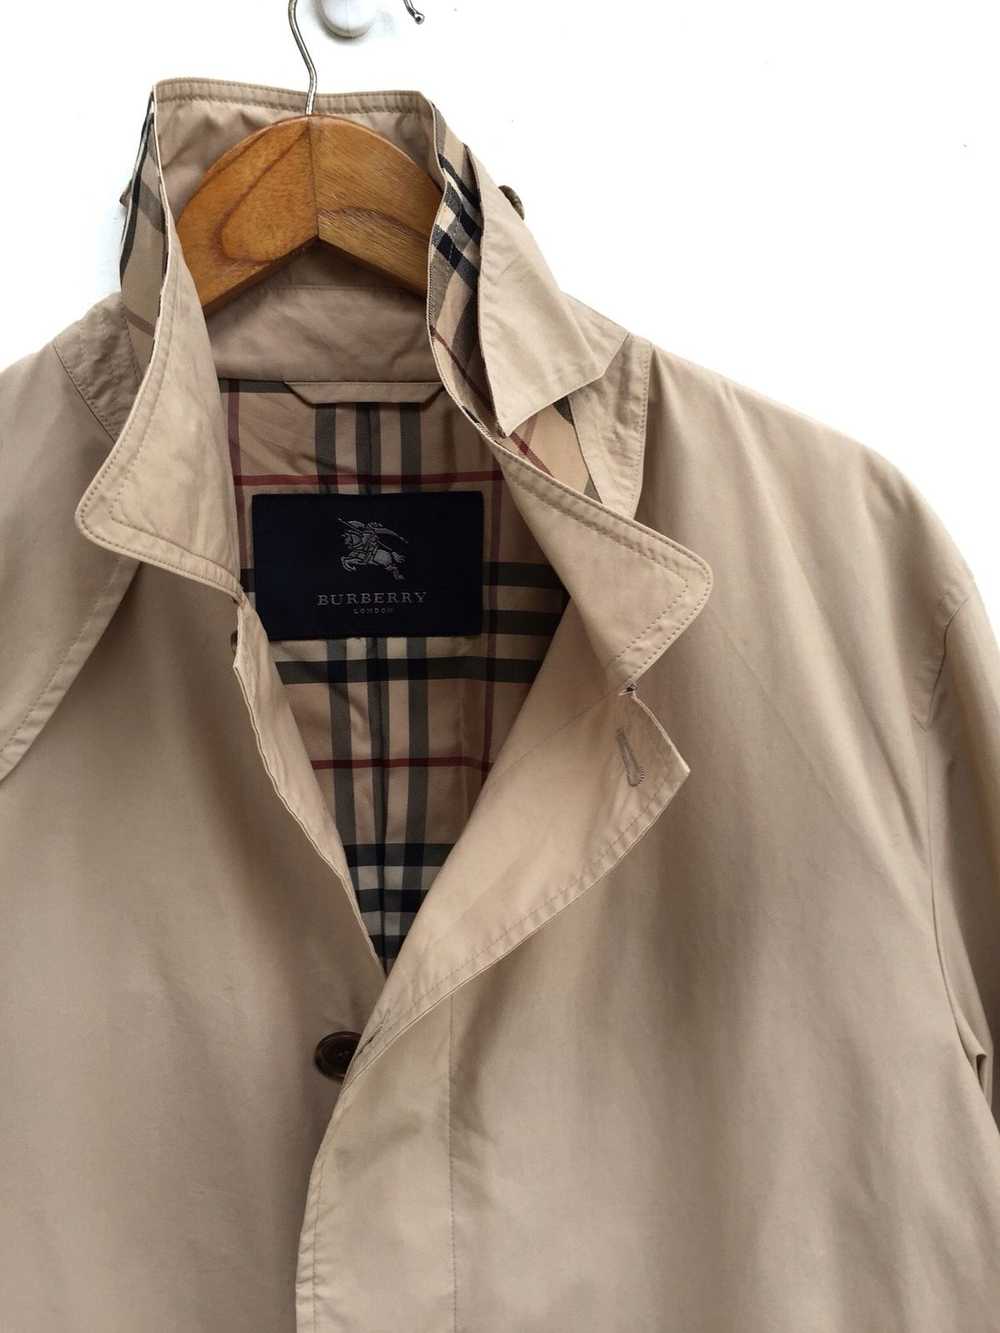 Burberry Vintage 90s Burberry London Trench Coat … - image 1